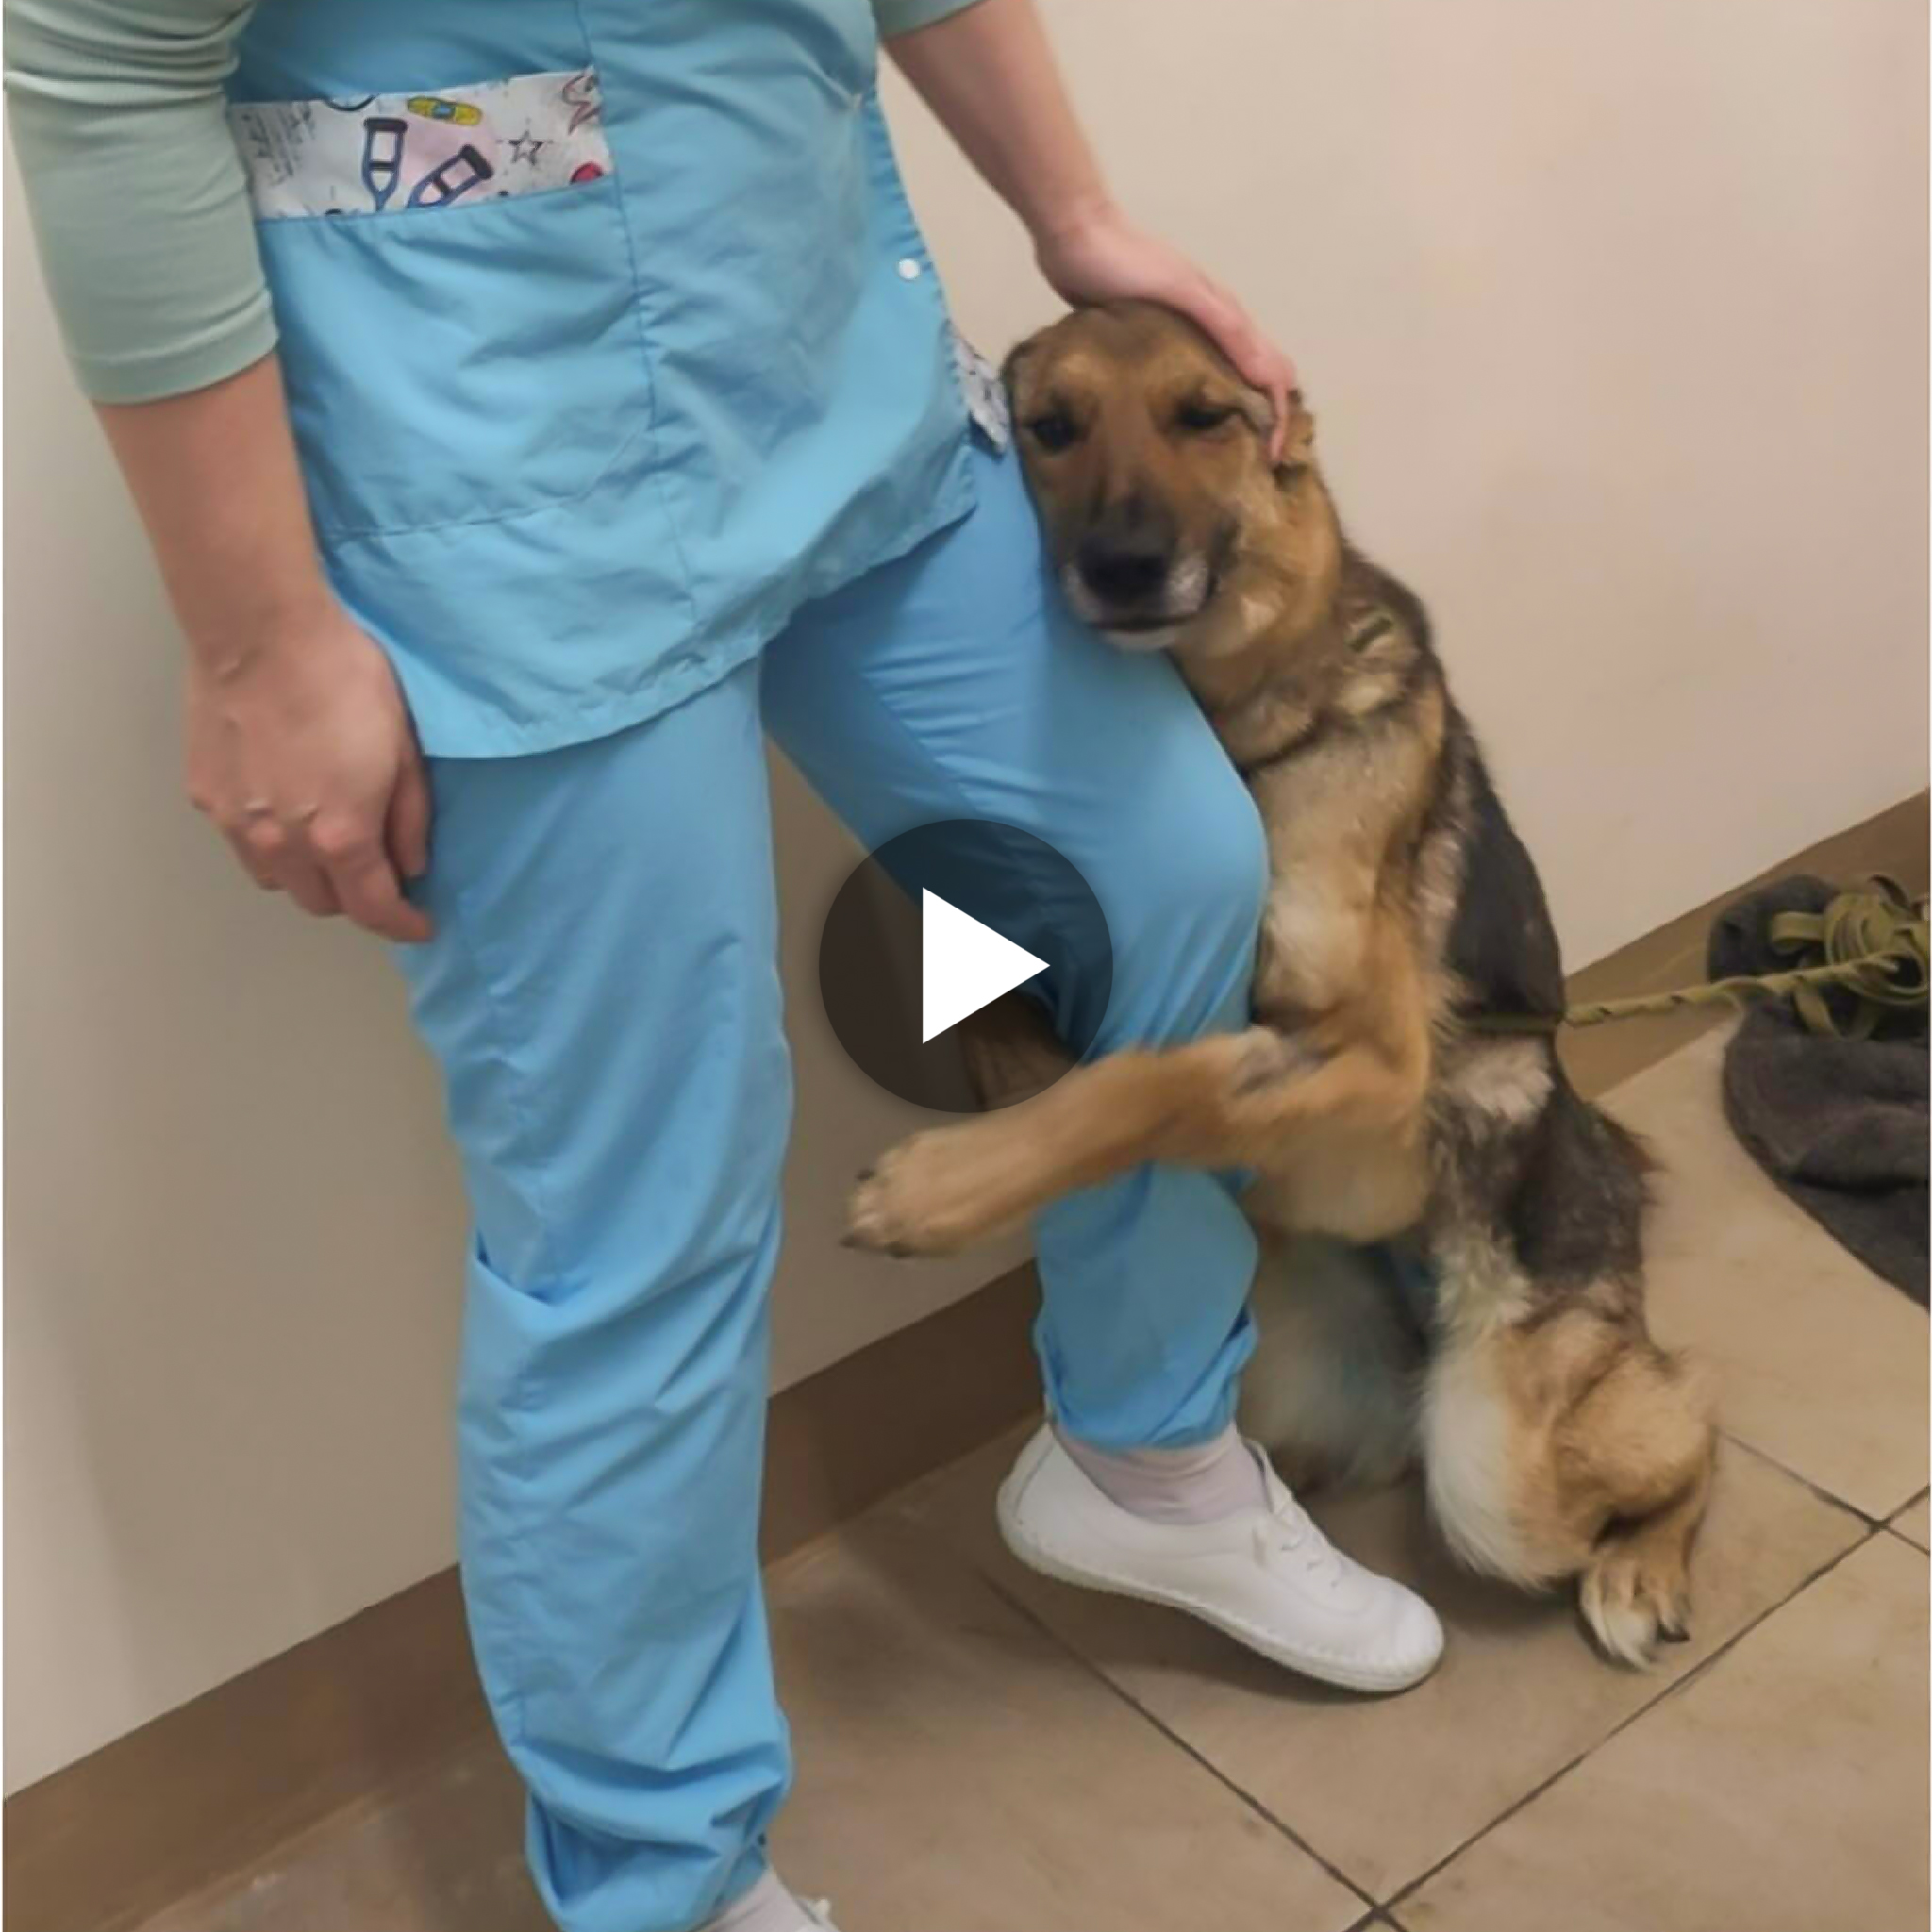 After being separated for more than three years, a devoted dog and its caring owner were happily reunited at the shelter; their heartfelt hug warmed the hearts of millions of people worldwide. ‎